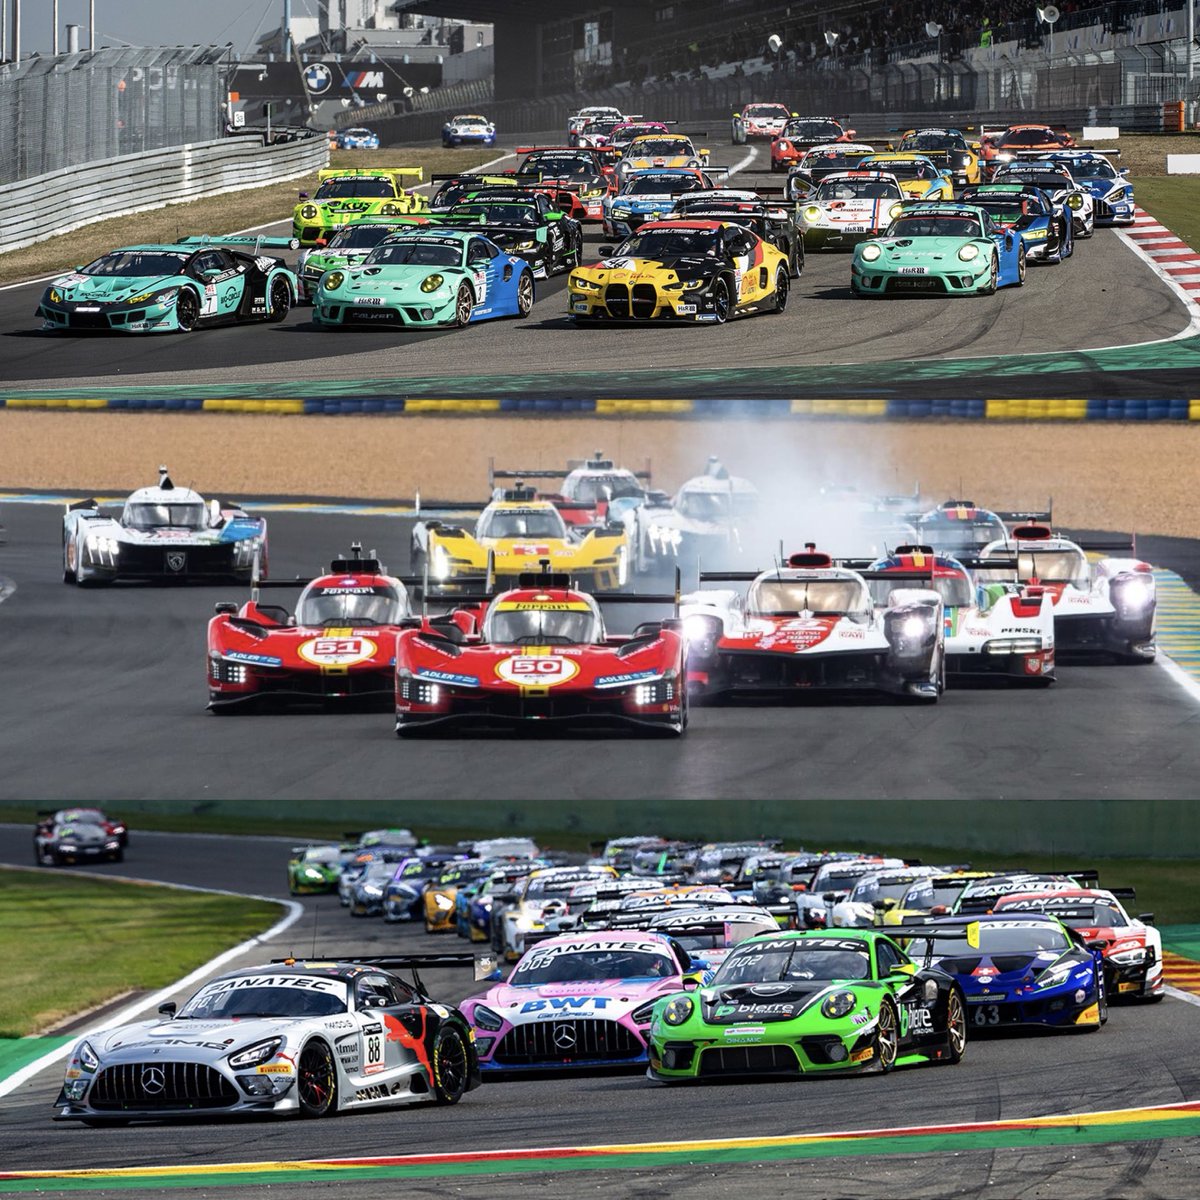 JUNE 🤝 24H MONTH

🇩🇪 Nürburgring - 1/2
🇫🇷 Le Mans - 15/16
🇧🇪 Spa - 29/30

Officially crowning June 2024 as 24H Month, with three of the world’s biggest enduros taking place in 30 days!

#N24H | #LeMans24 | #Spa24